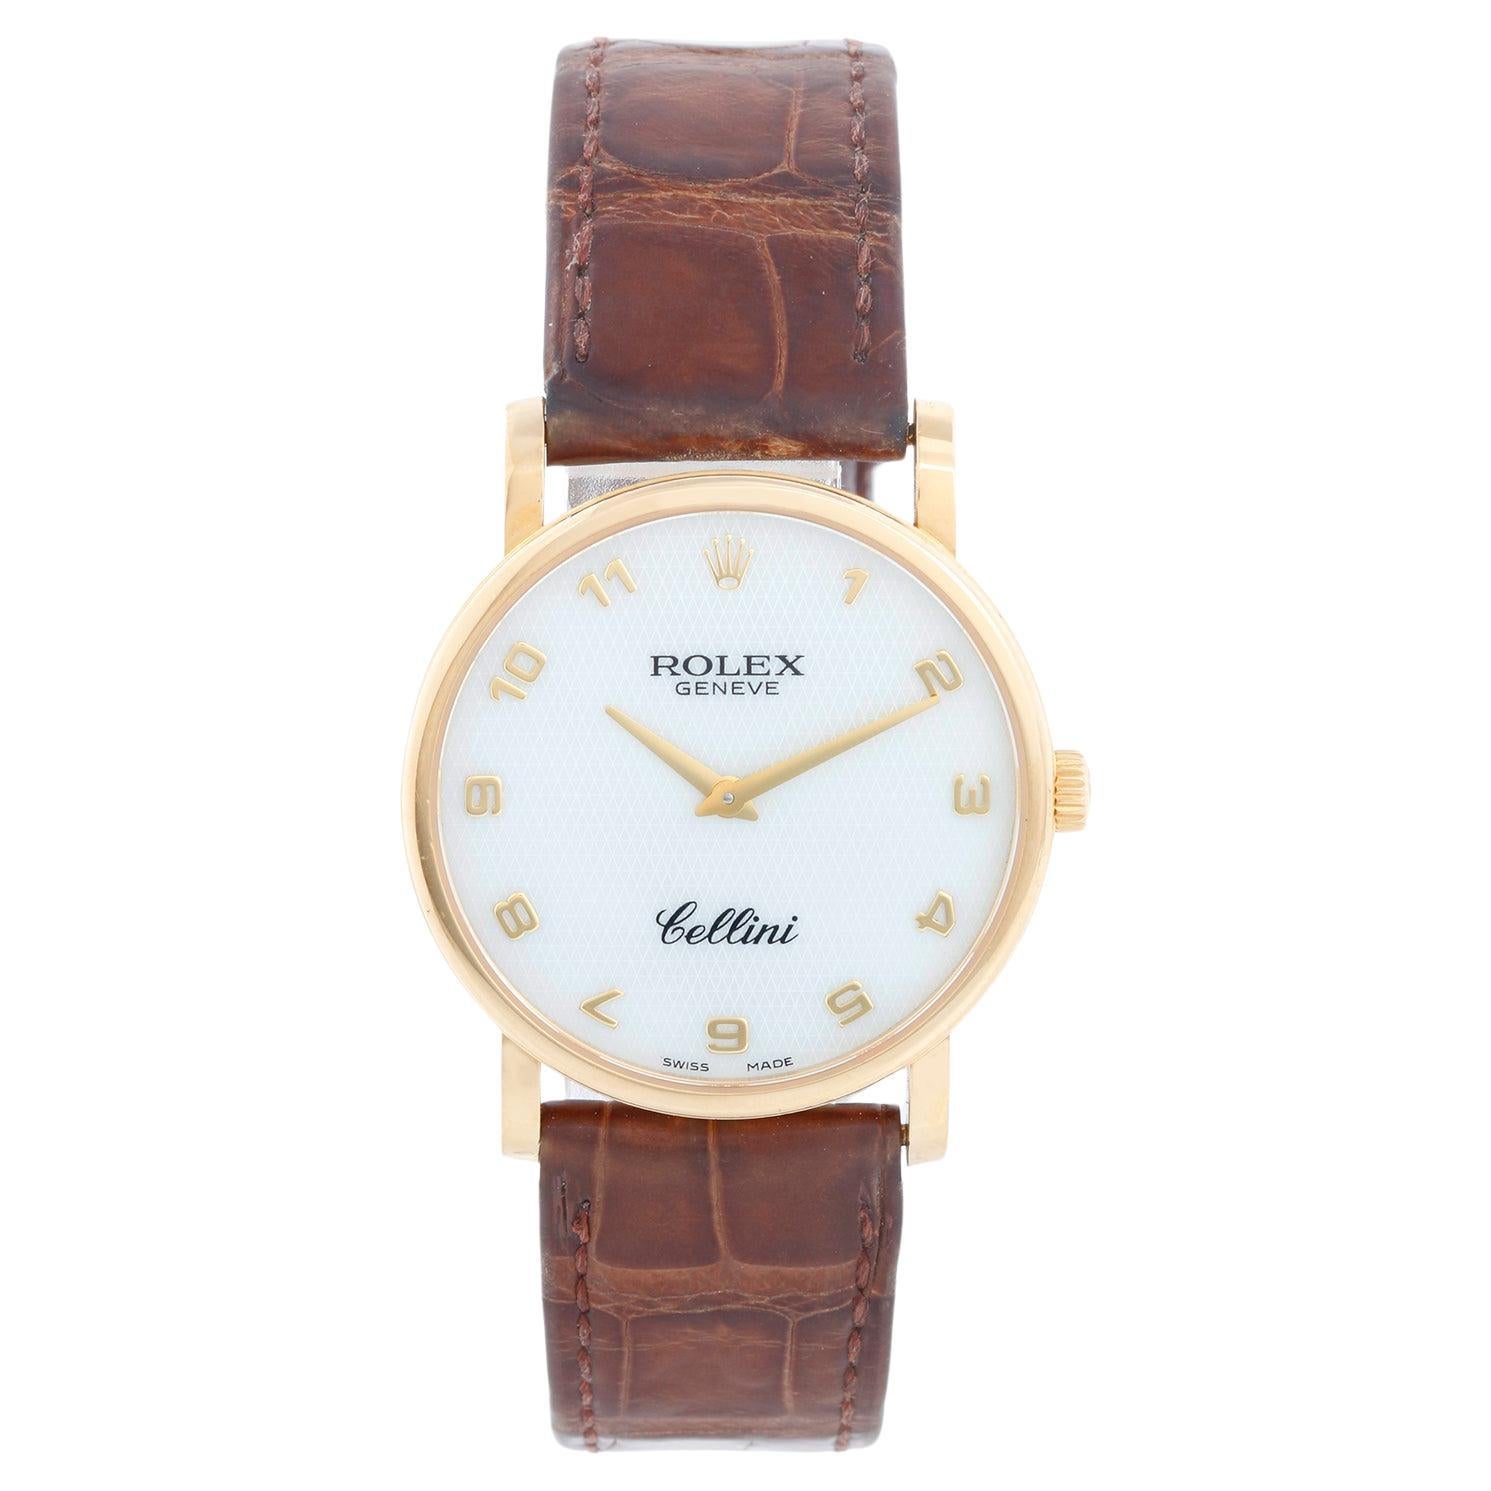 Rolex Cellini Classic 18k Yellow Gold Men's Watch 5115 For Sale